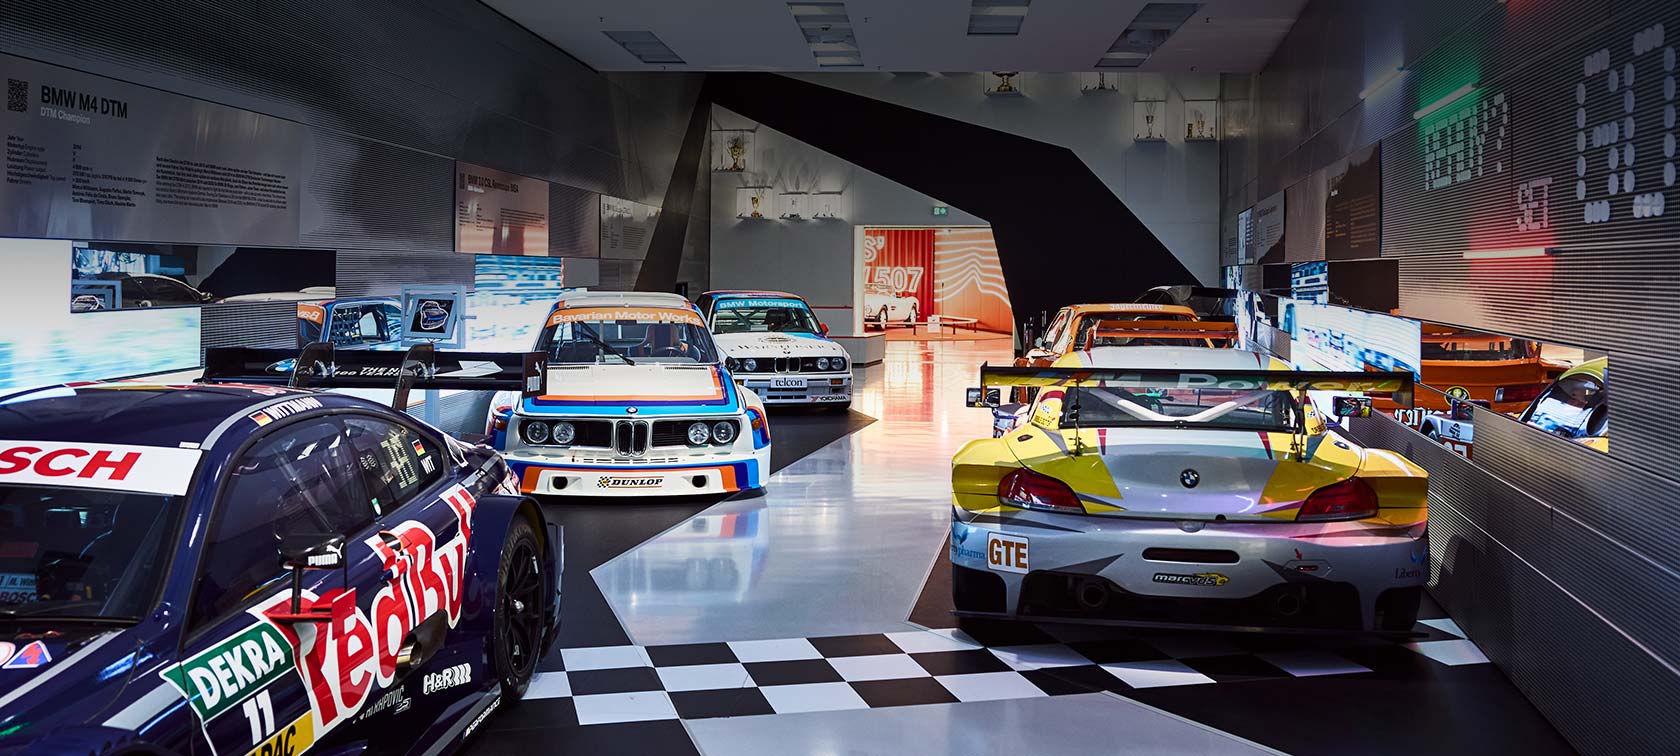 THE HOUSE OF MOTOR SPORT EXHIBITION IN THE BMW MUSEUM